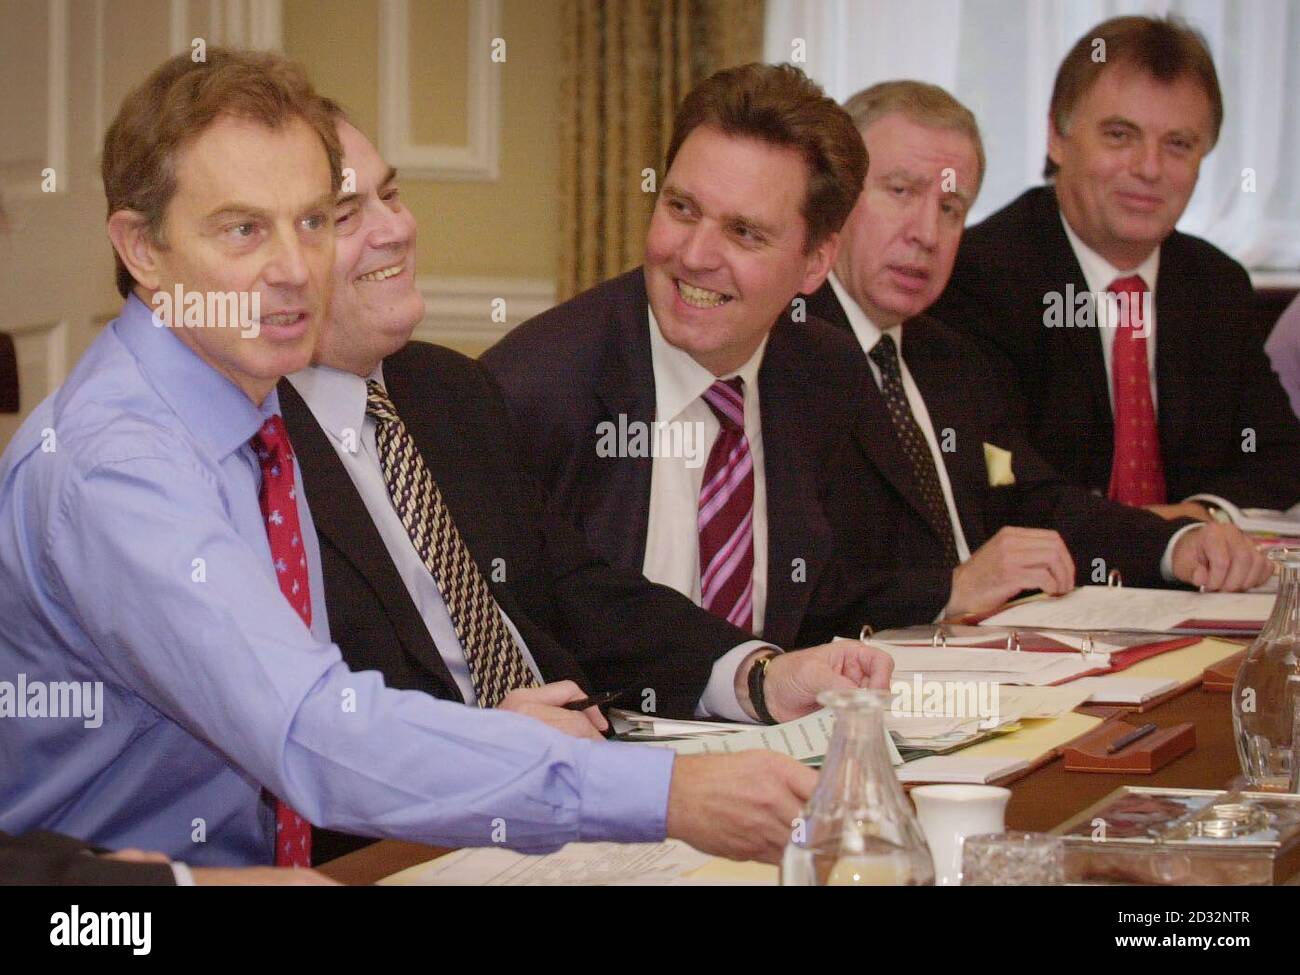 Prime Minister Tony Blair with the Cabinet at their weekly meeting . From left: Tony Blair, Deputy Prime MInister John Prescott, Health Secretary Alan Milburn, Welsh Secretary Paul Murphy, and Minister for Work and Pensions Andrew Smith in Downing St. Stock Photo